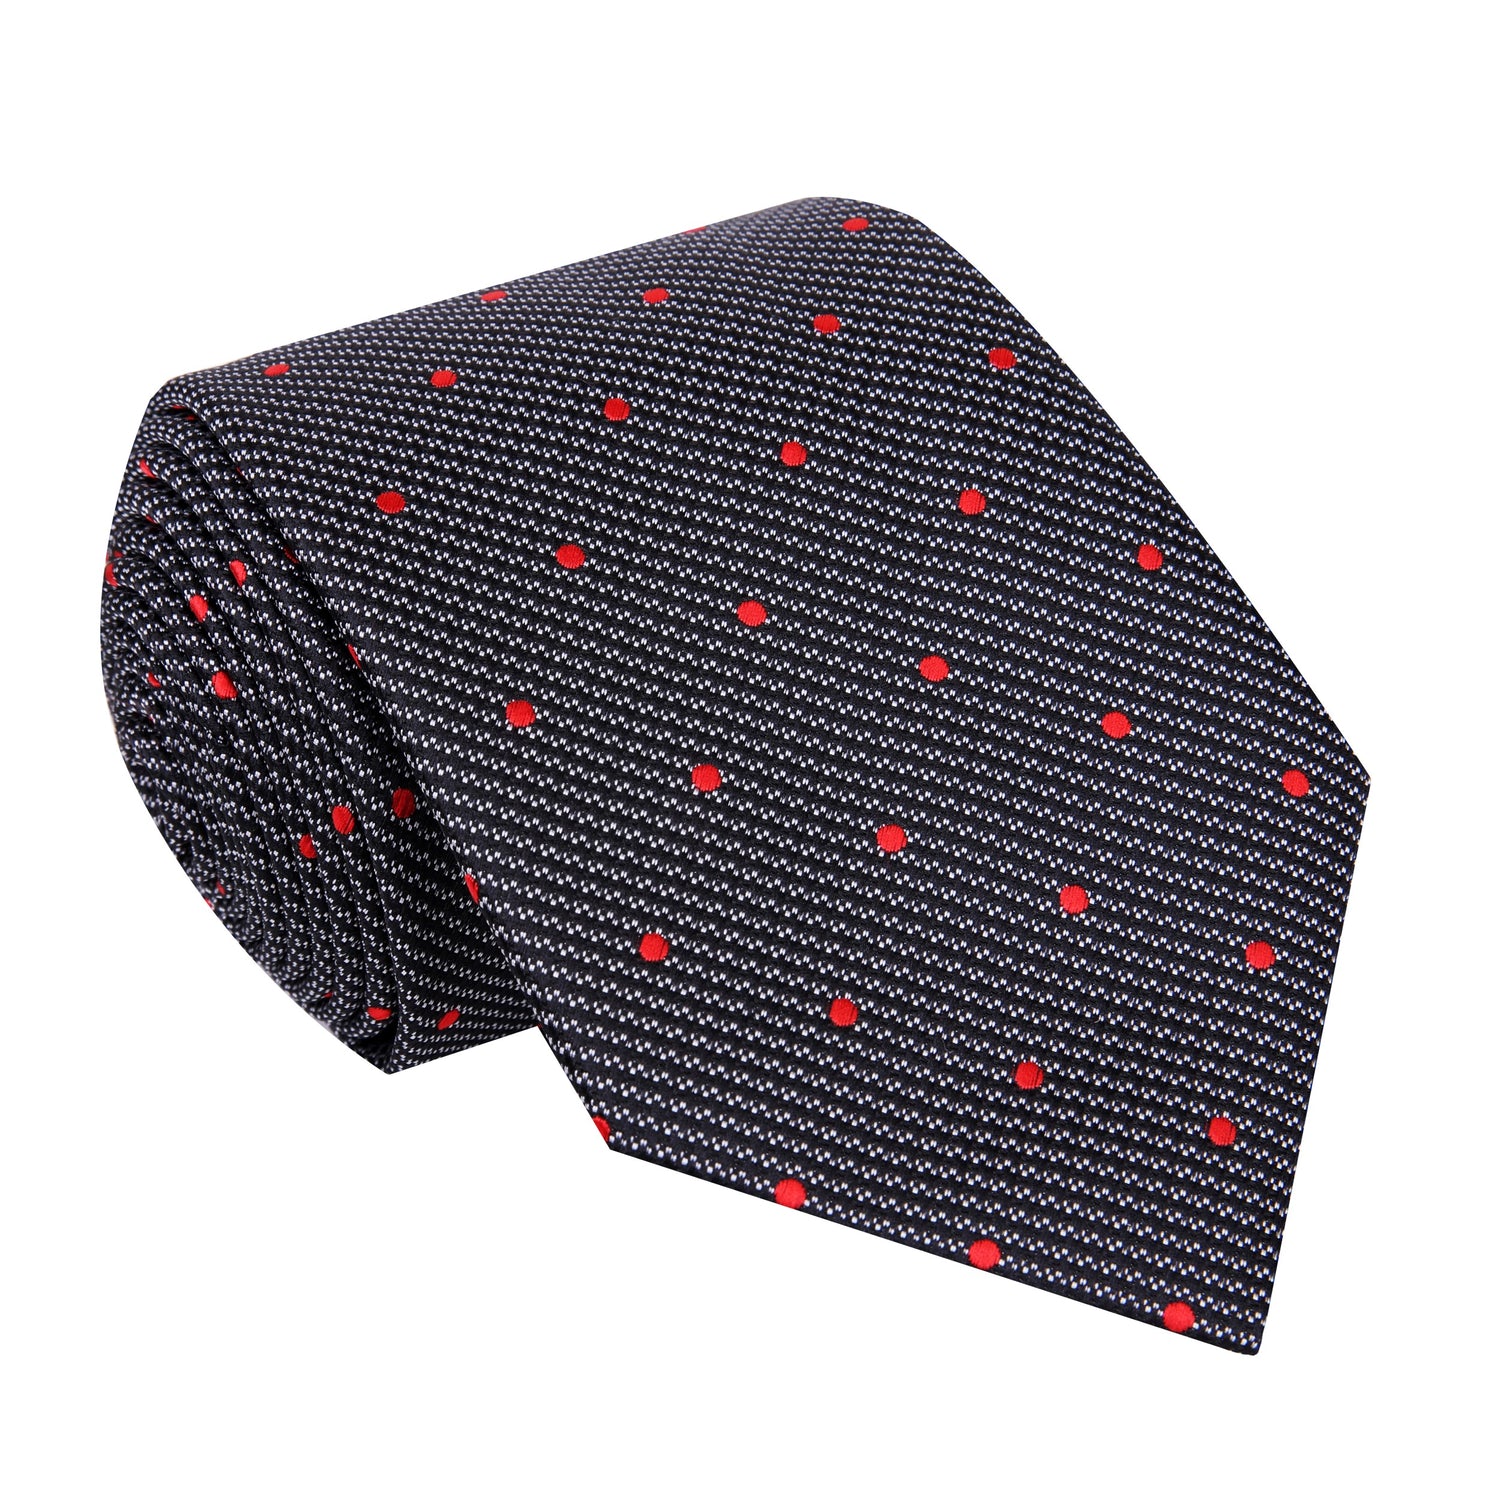 A Black, Red Polka Dot With Check Pattern Silk Necktie 